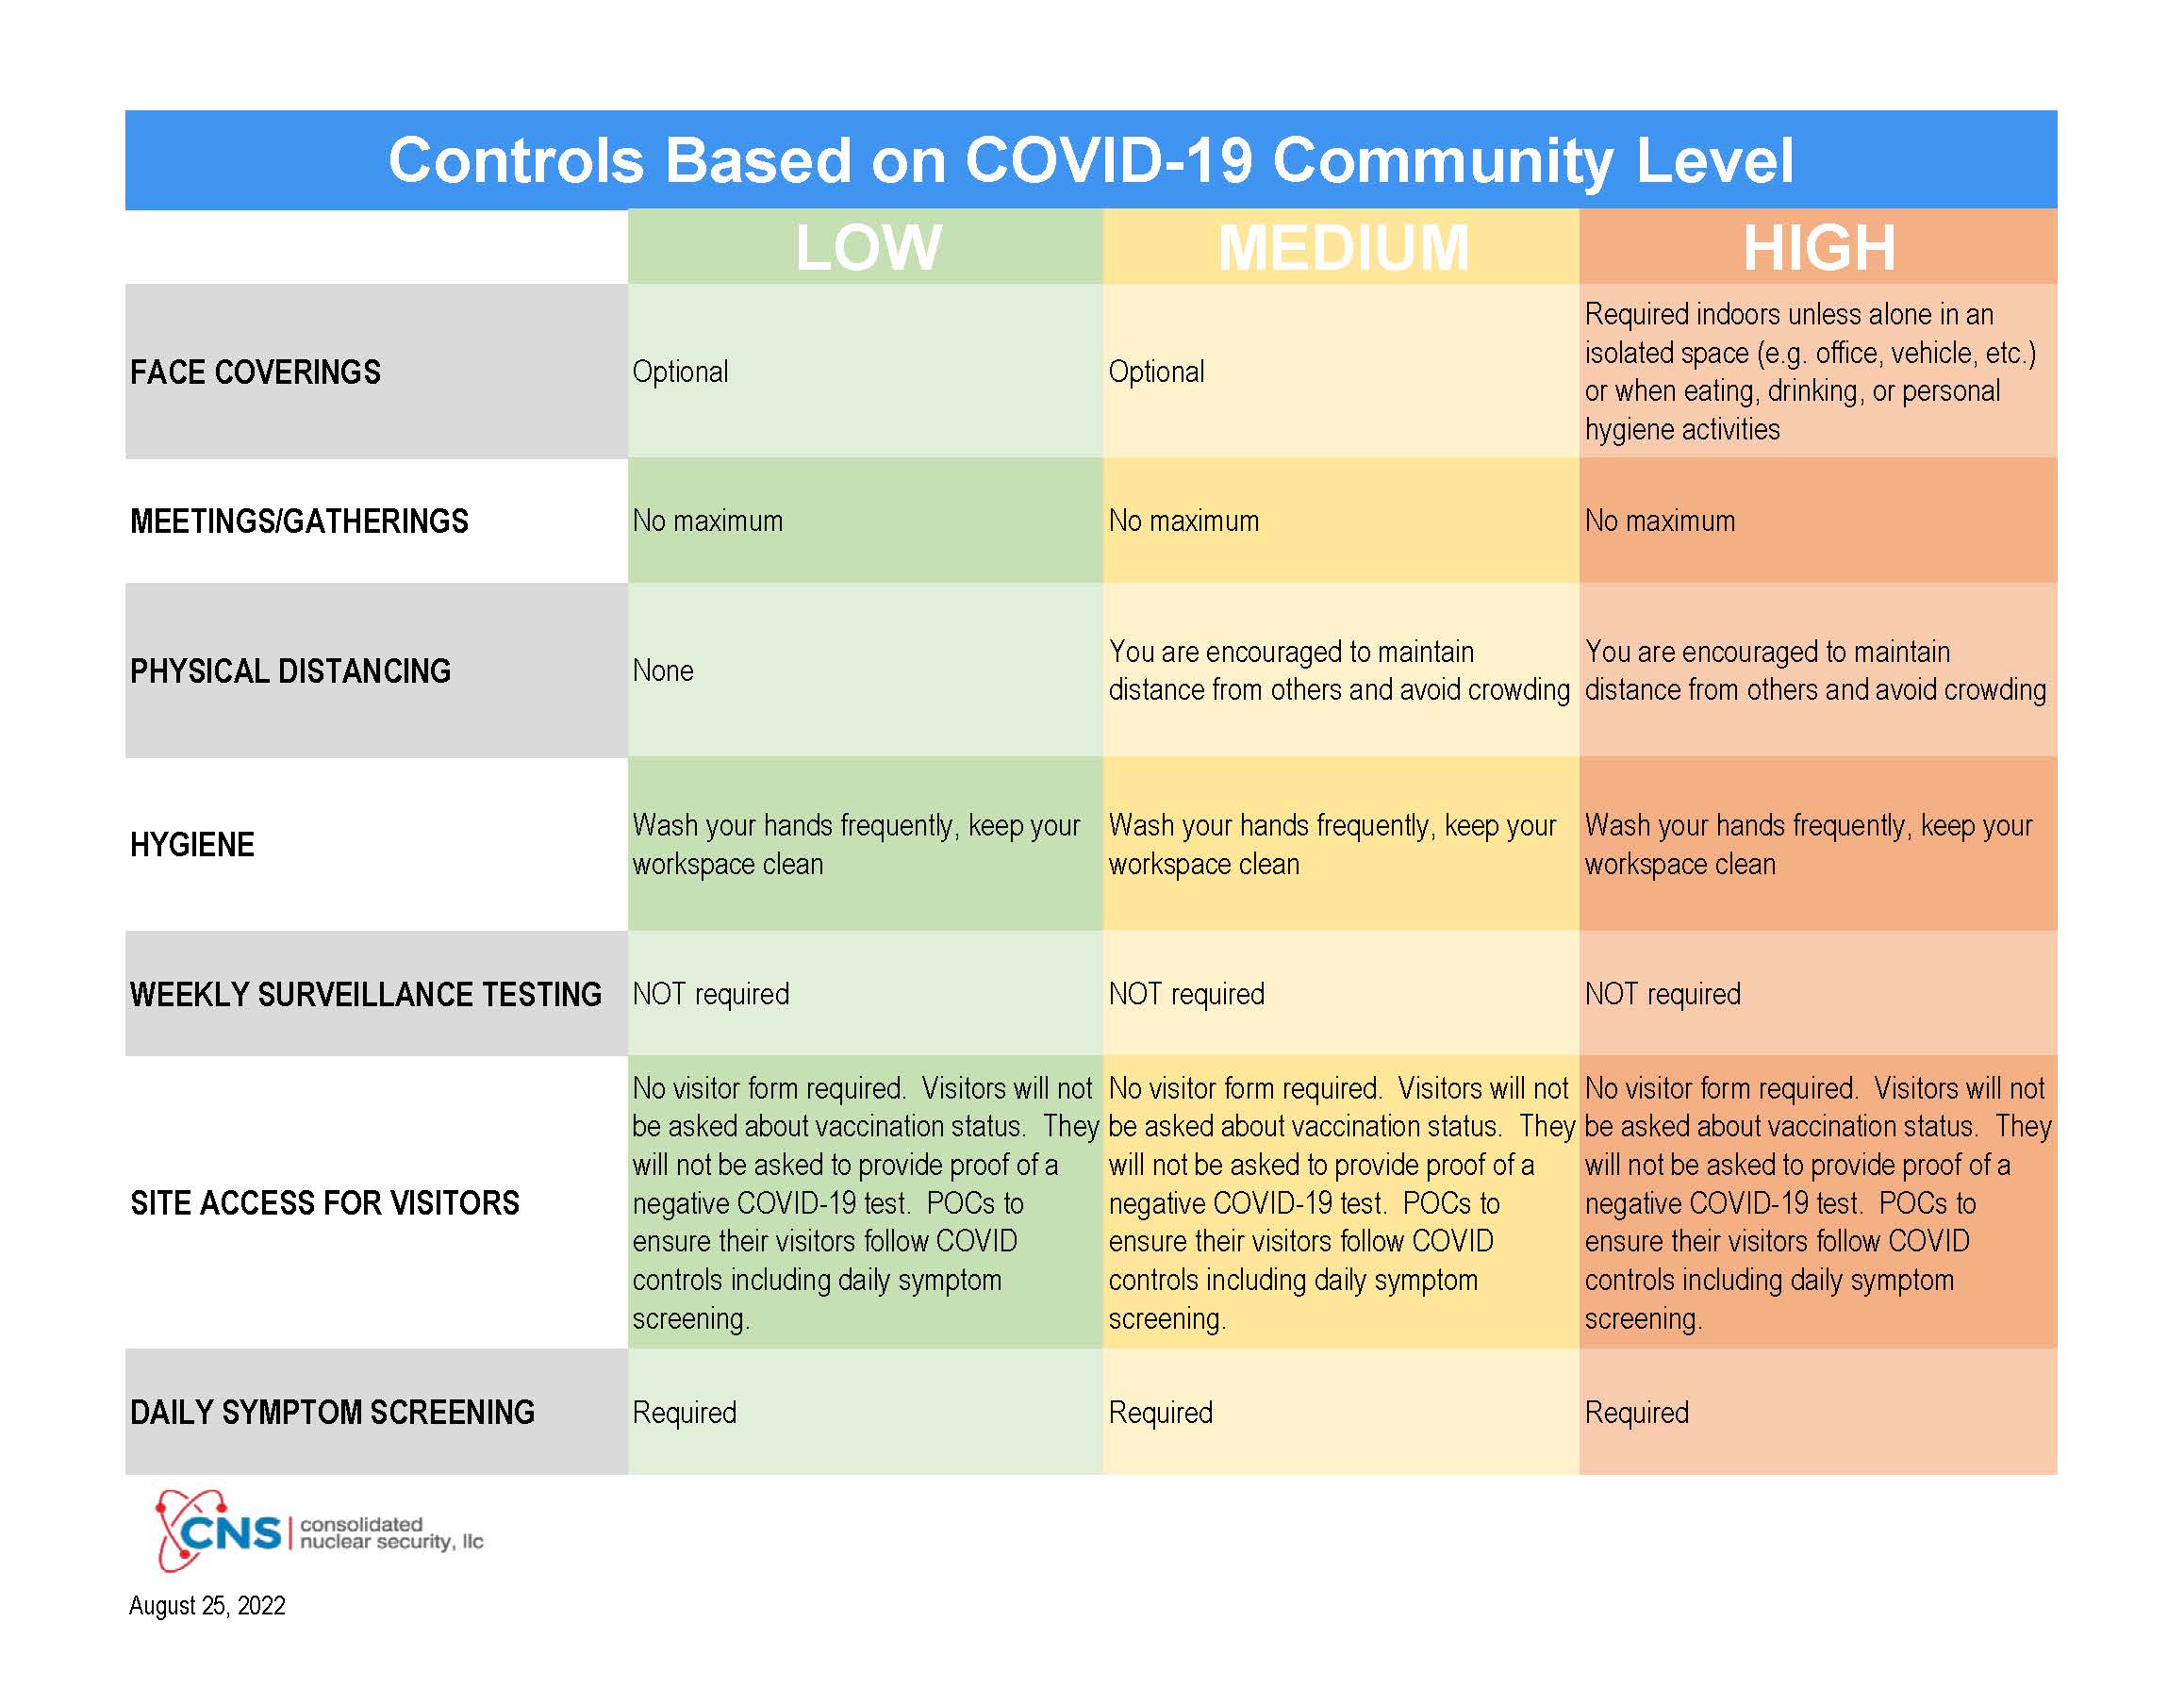 Controls Based on COVID-19 Community Level Color